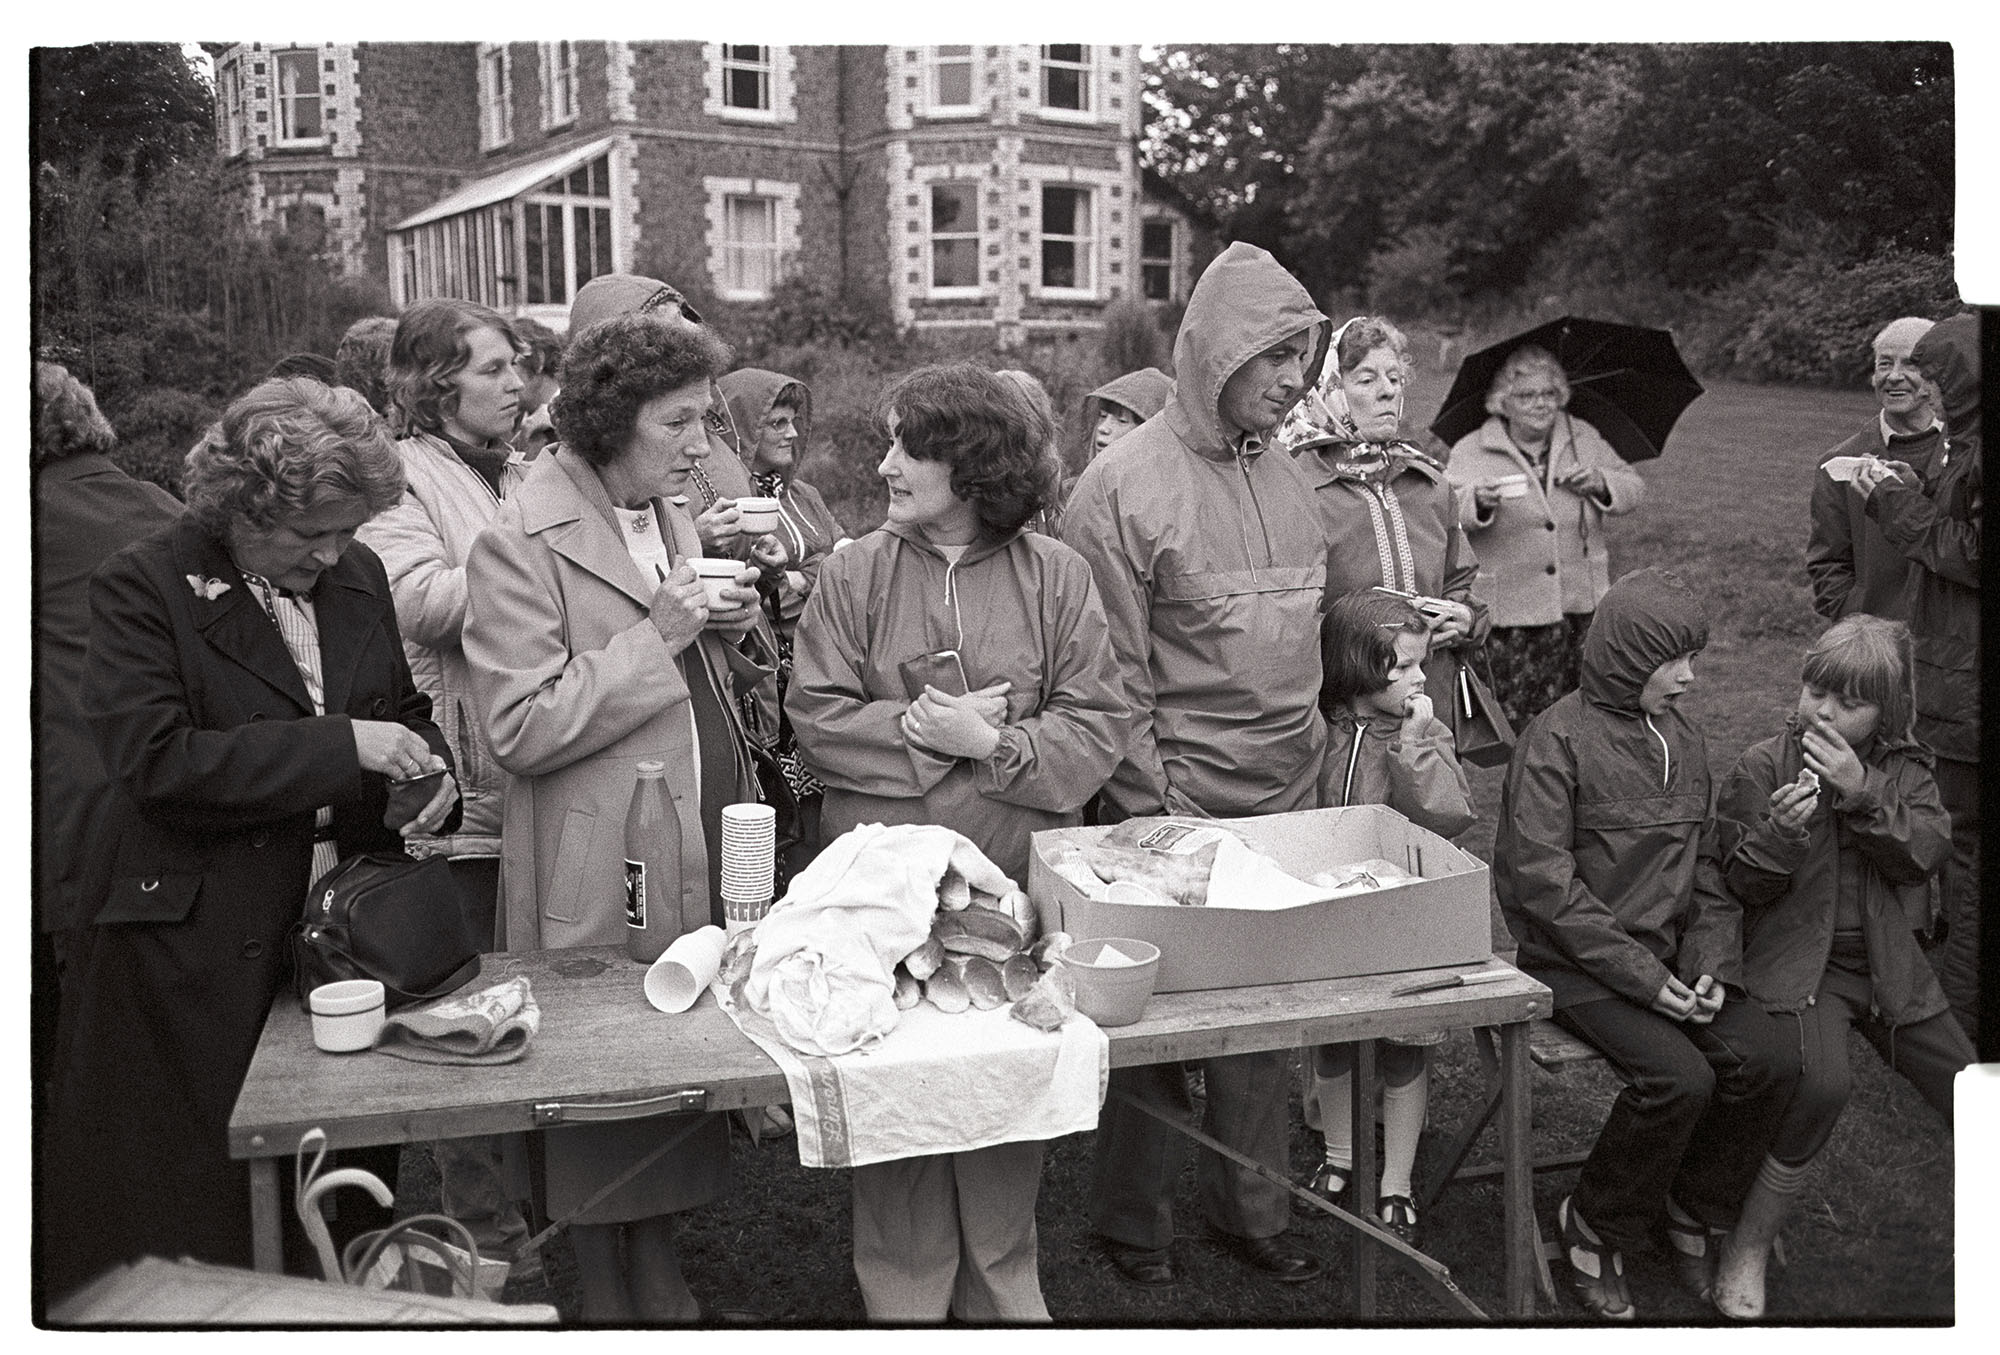 Baptist Garden Party in rain barbeque, hot dogs and tea. 
[A group of people in coats, anoraks and with umbrellas, standing in the garden by a table of hot dogs and drinking tea at the Baptist Church garden party at Barlands, Dolton. A large house is in the background.]